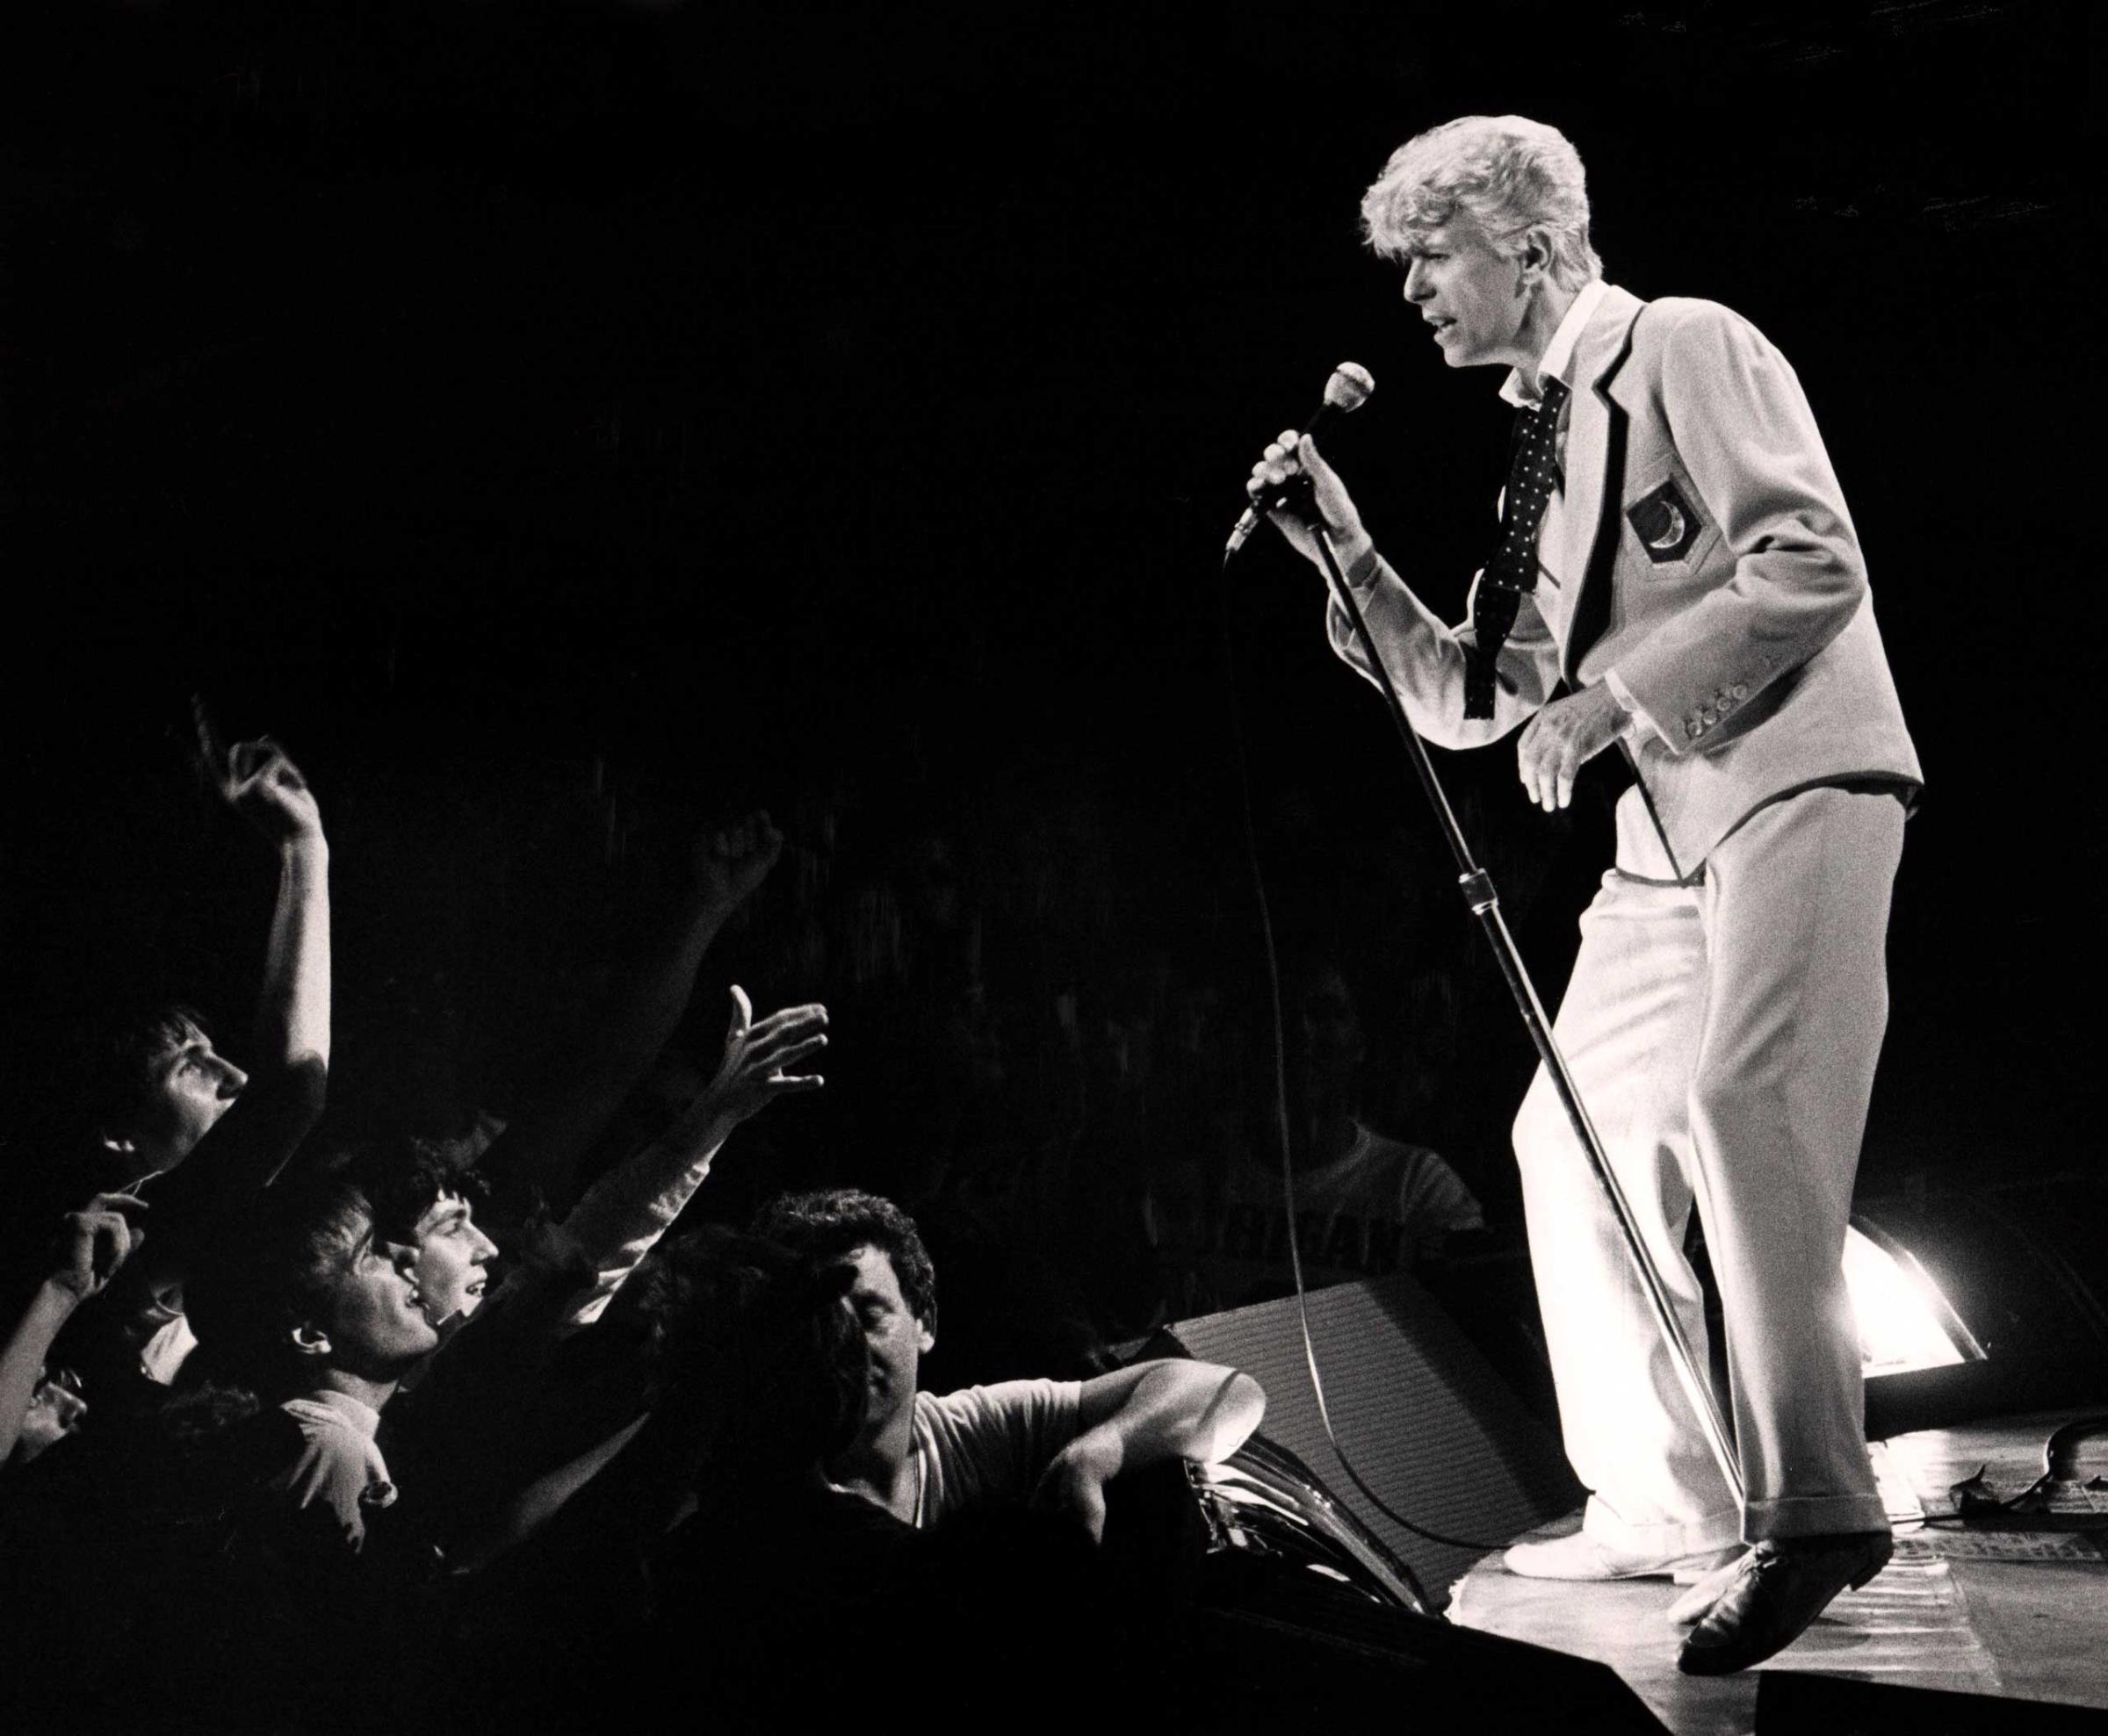 David Bowie at a Madison Square Garden concert in 1983.